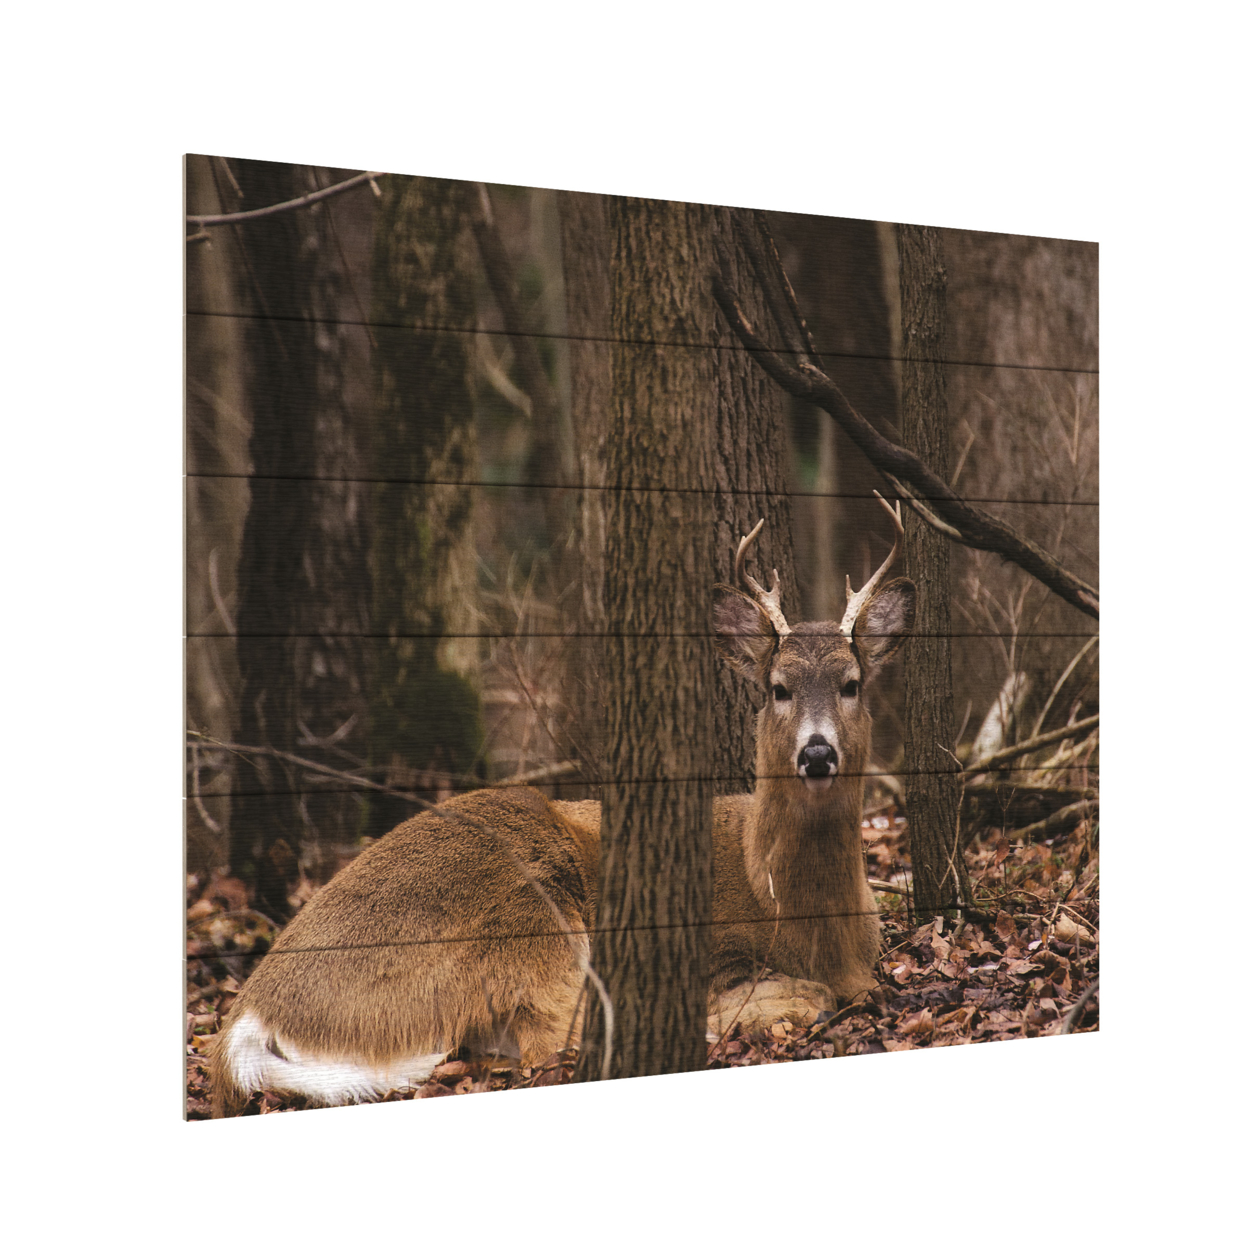 Wooden Slat Art 18 X 22 Inches Titled Sitting Deer/Lake Isaac Ready To Hang Home Decor Picture